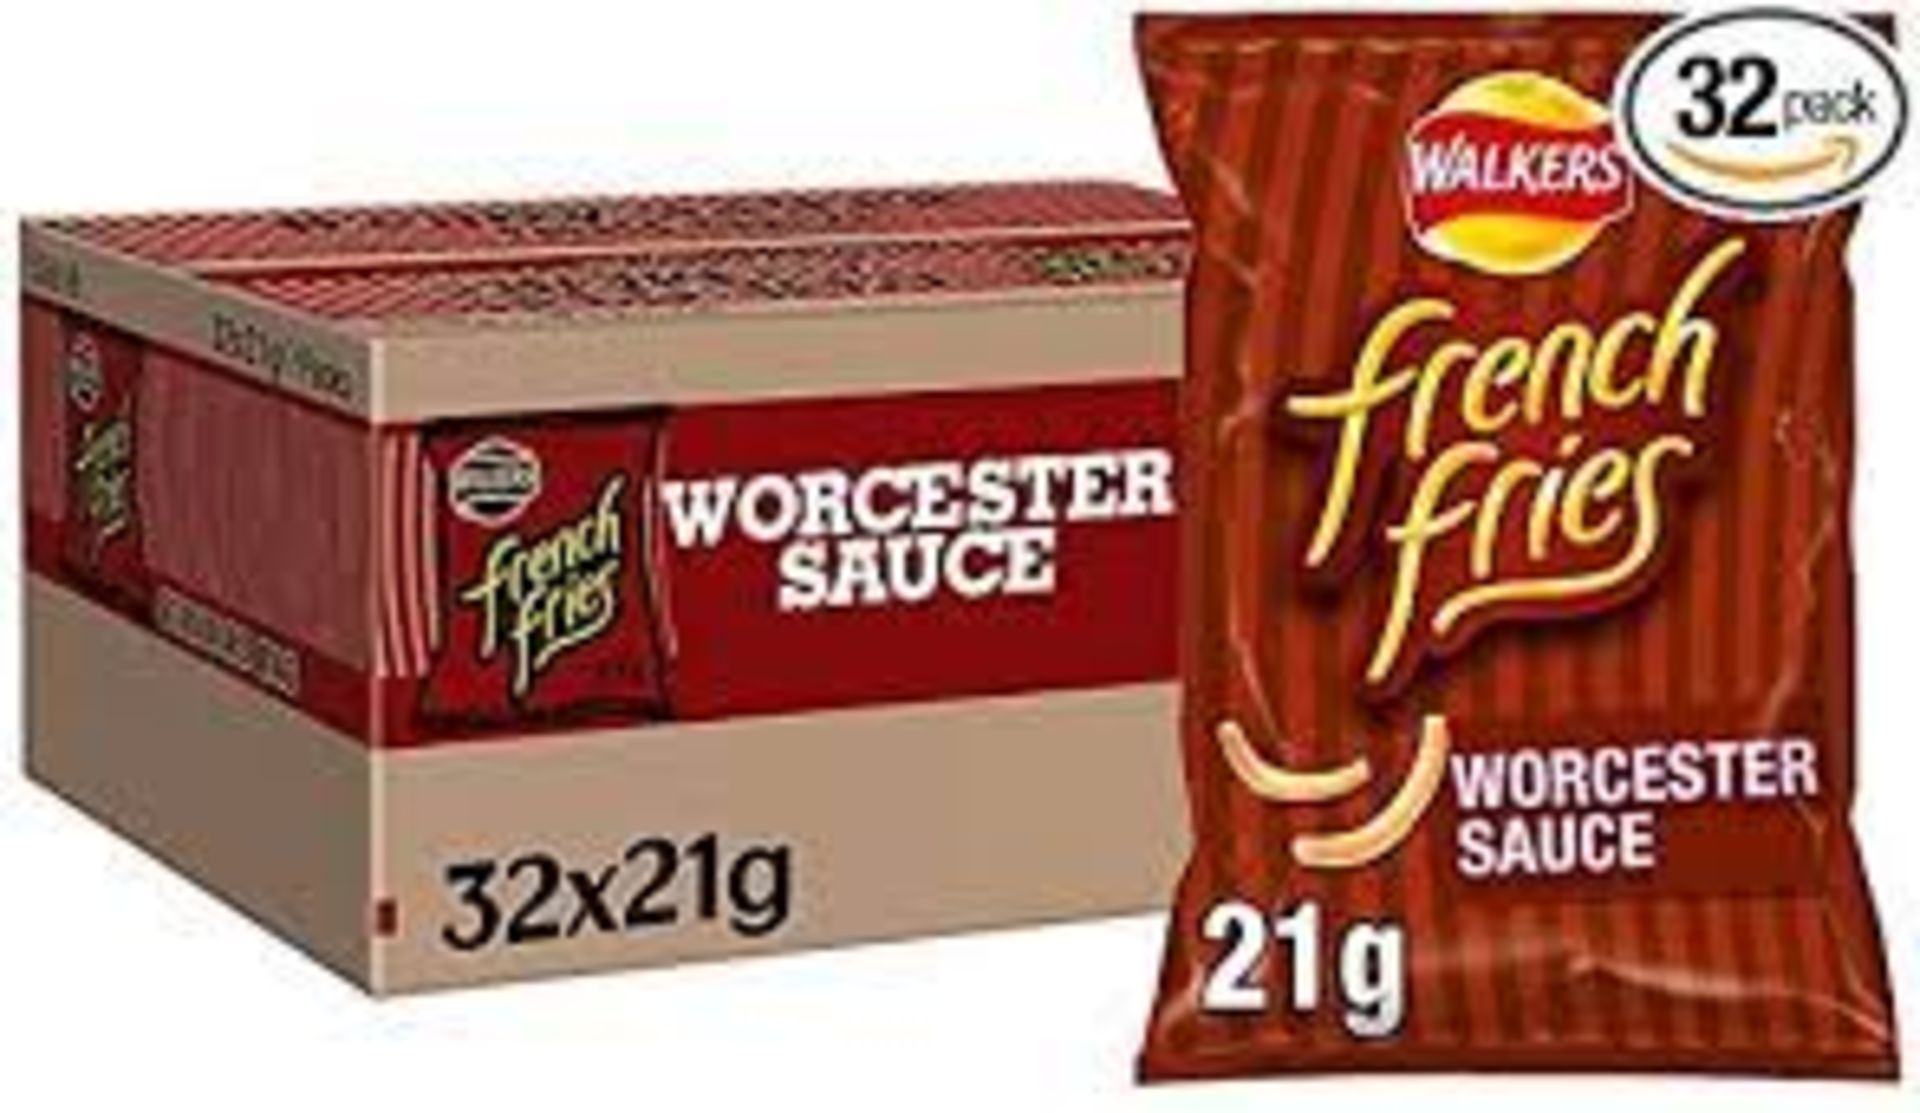 RRP £252 (Approx. Count 16) spW57n5907U (2) 8 x Walkers Crisps French Fries Worcester Sauce